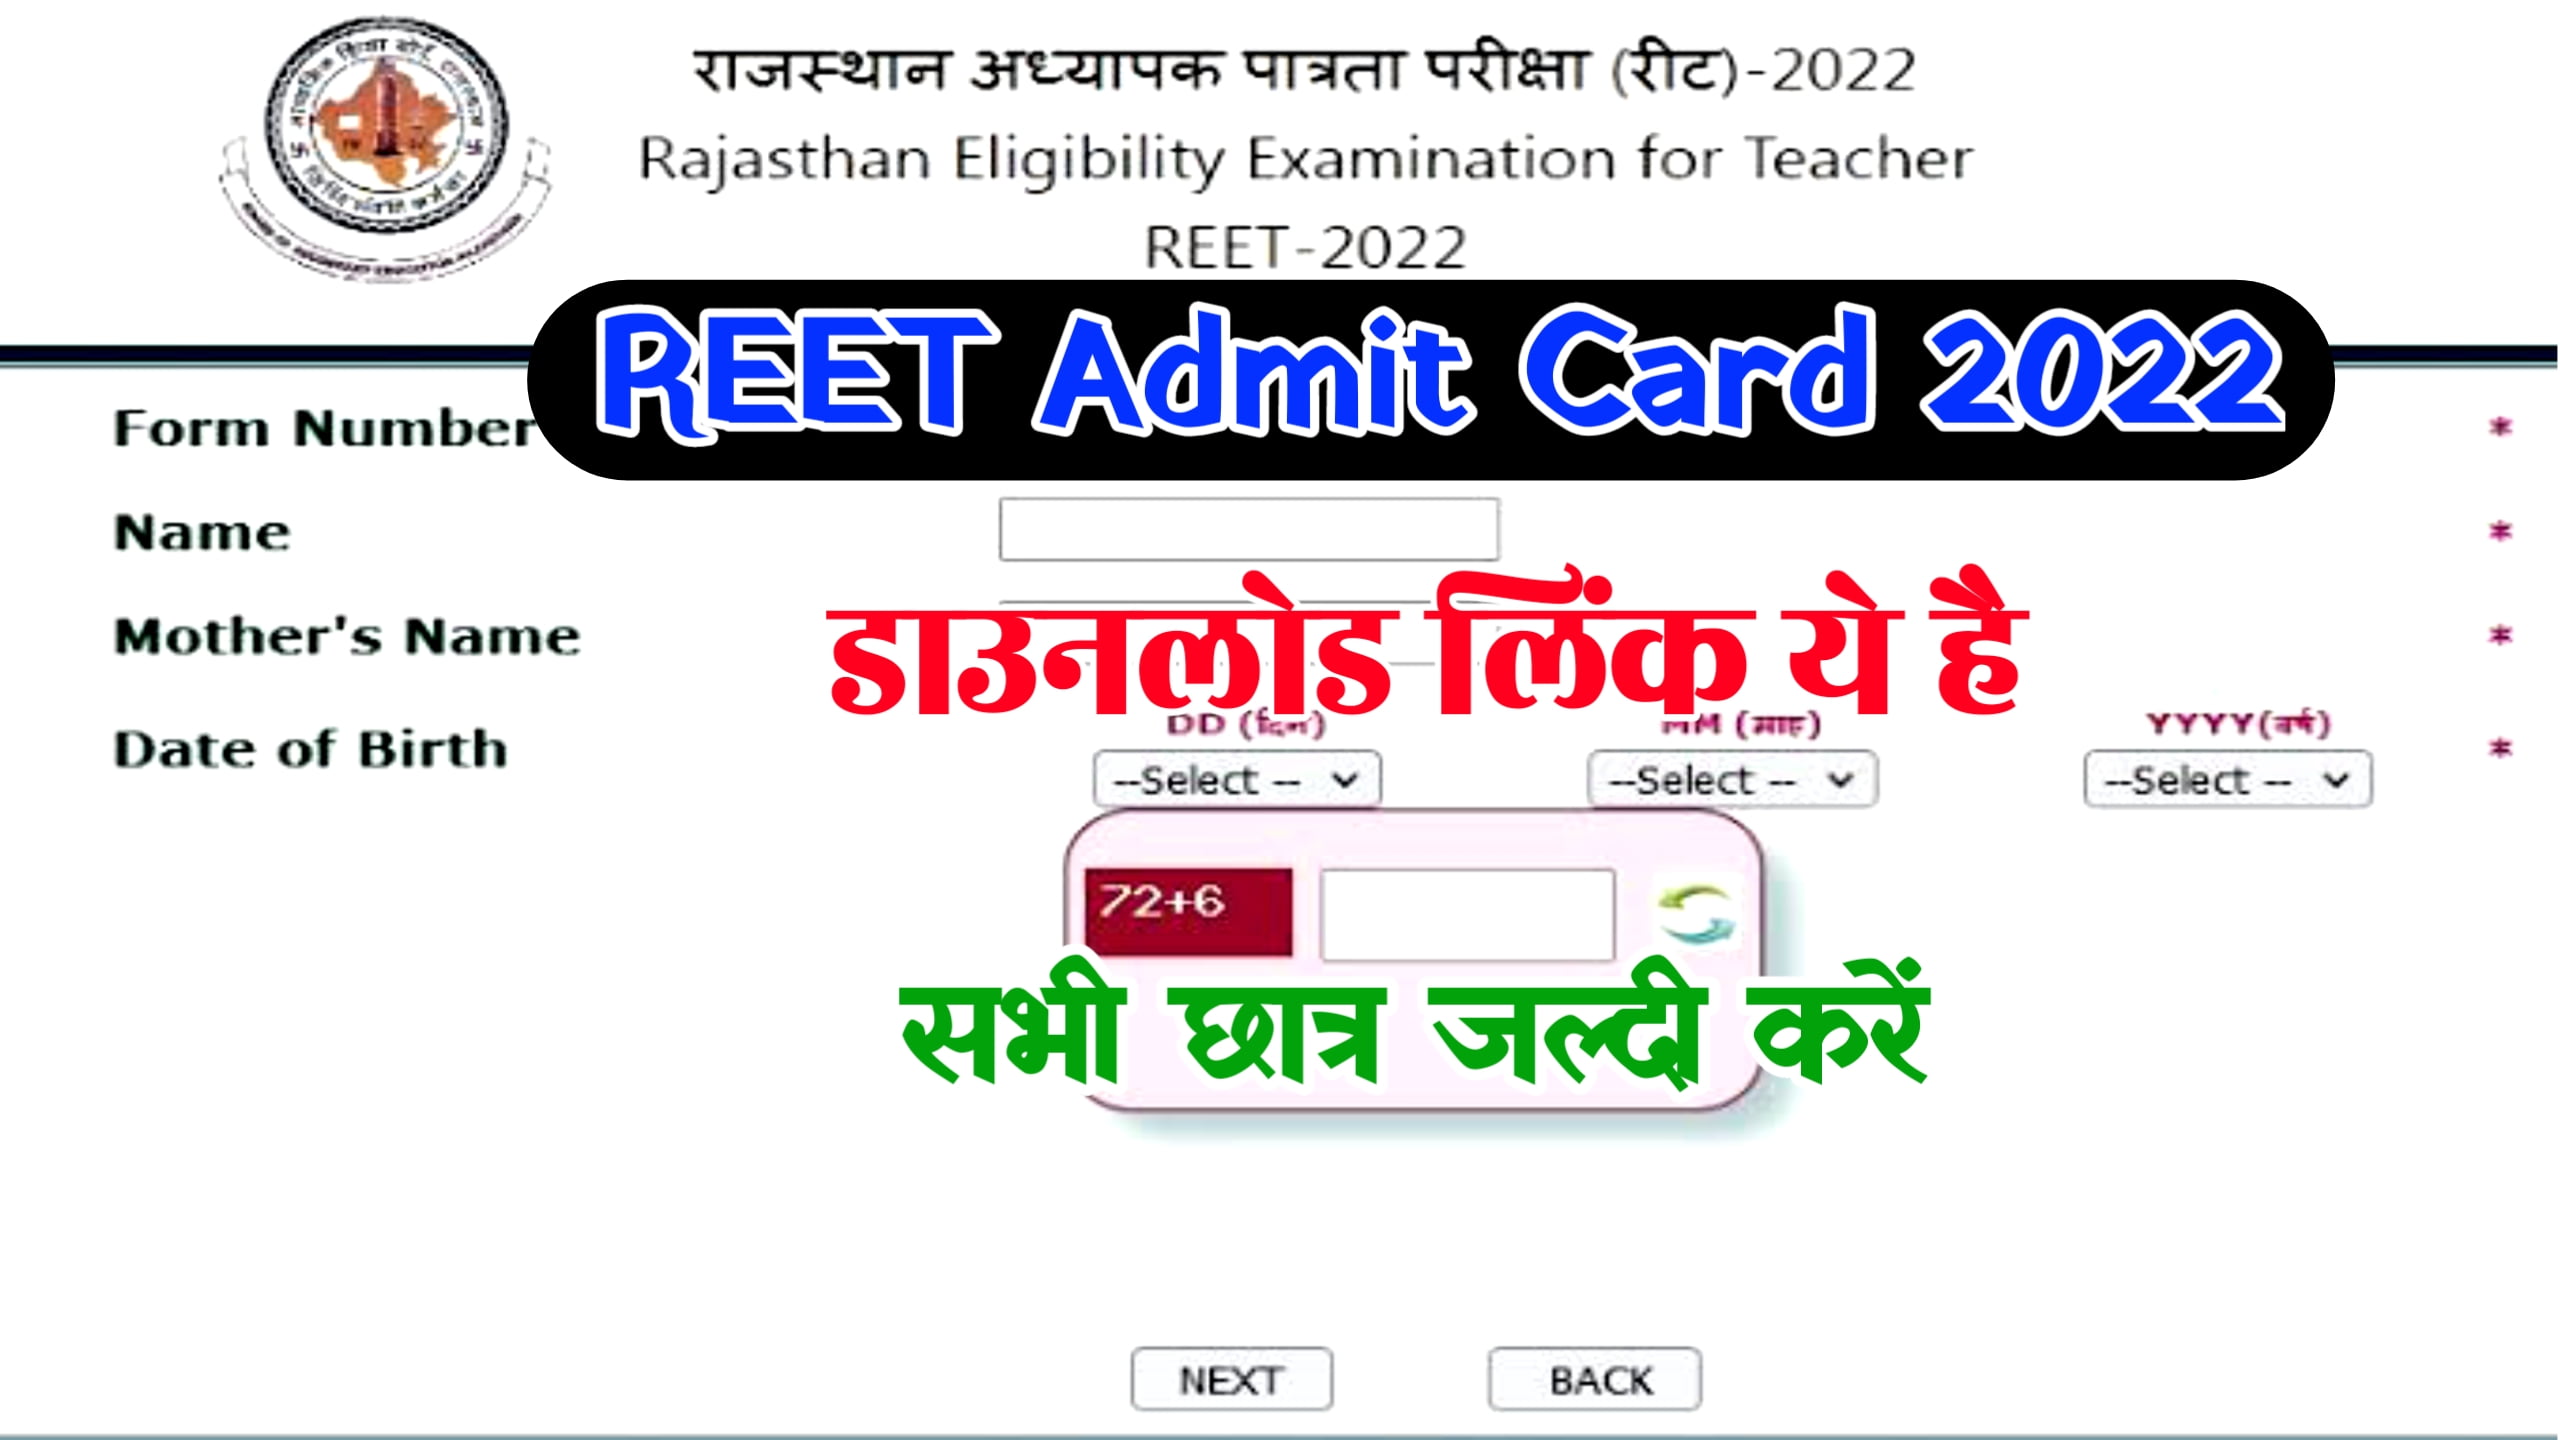 REET Admit Card 2022 Live Out : Hall Ticket Link @www.reetbser2022.in